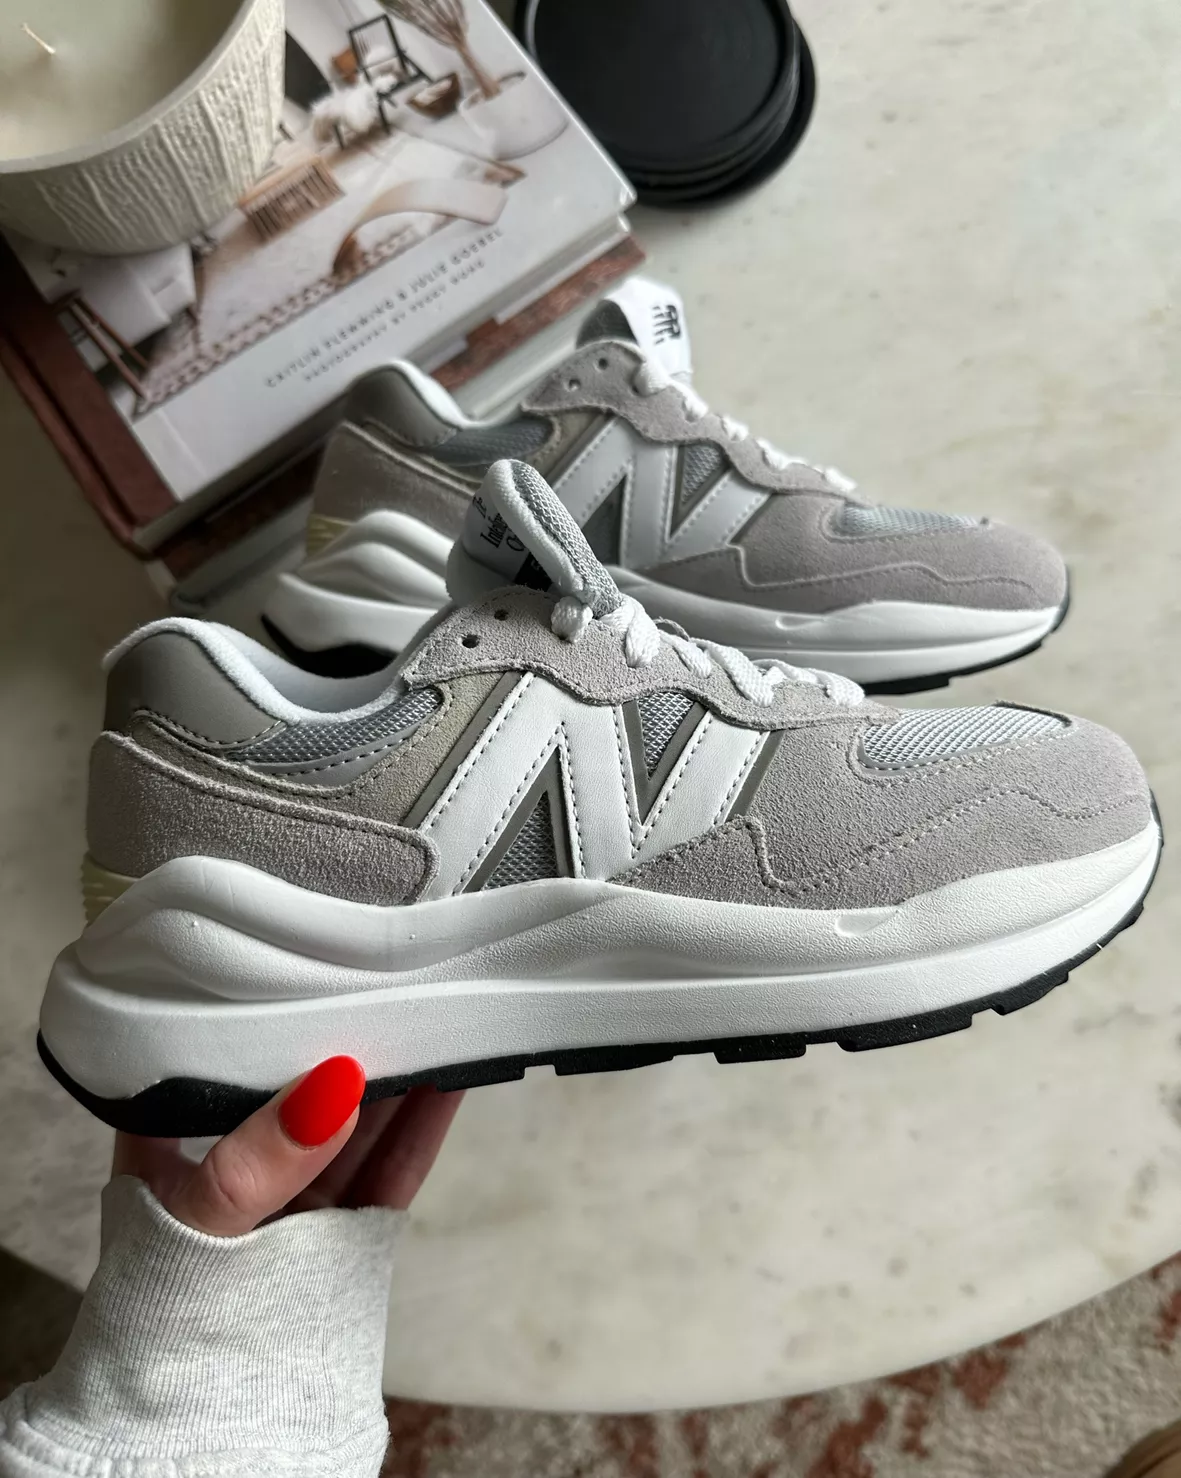 New Balance 57/40 sneakers in gray